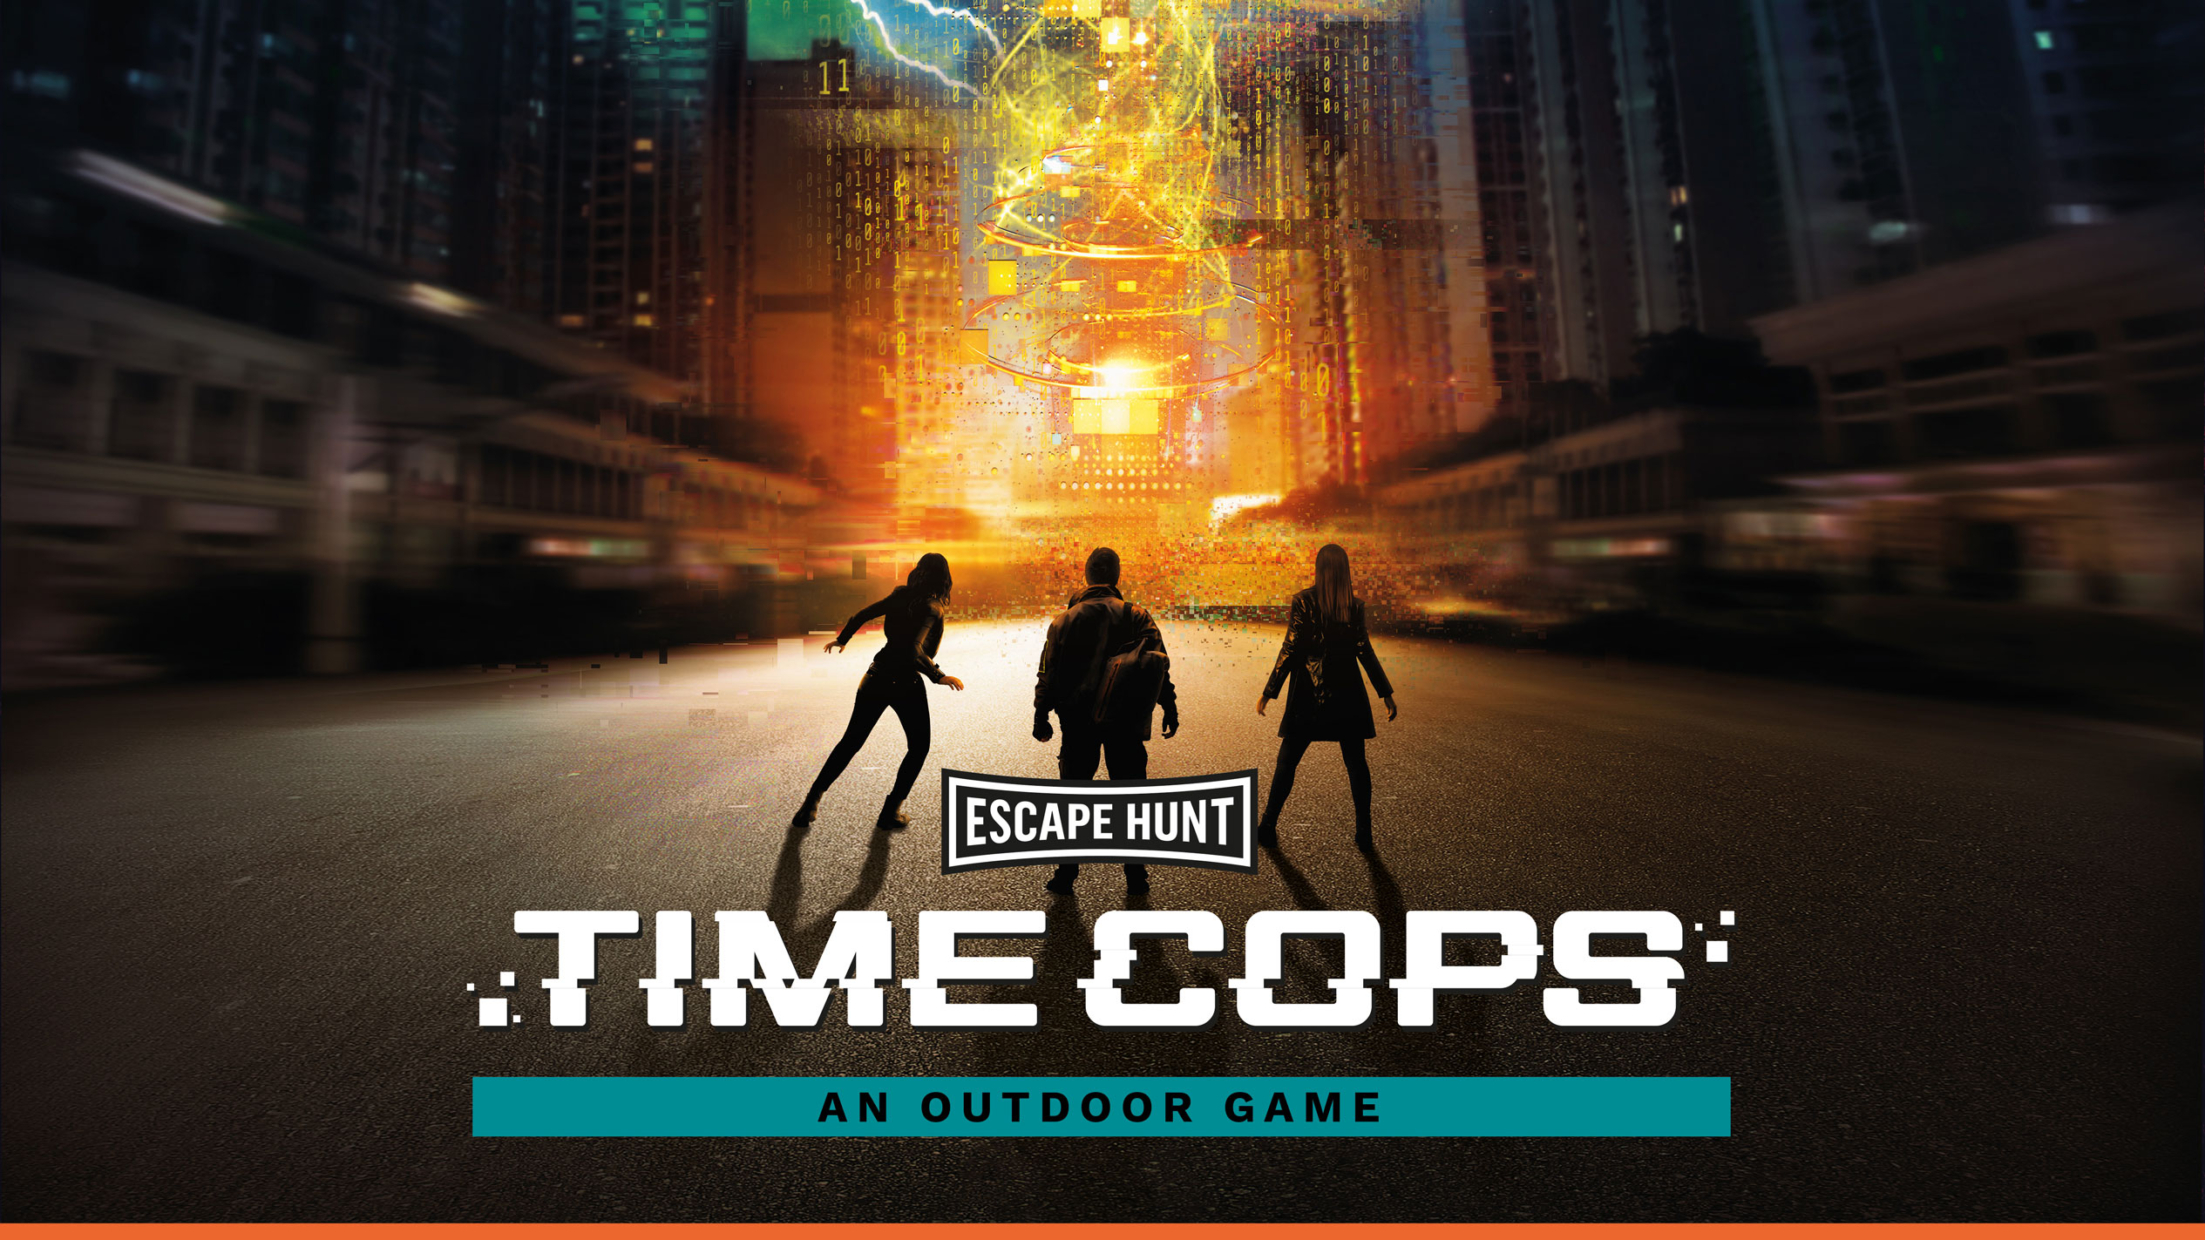 NEW OUTDOOR GAME: TIME COPS